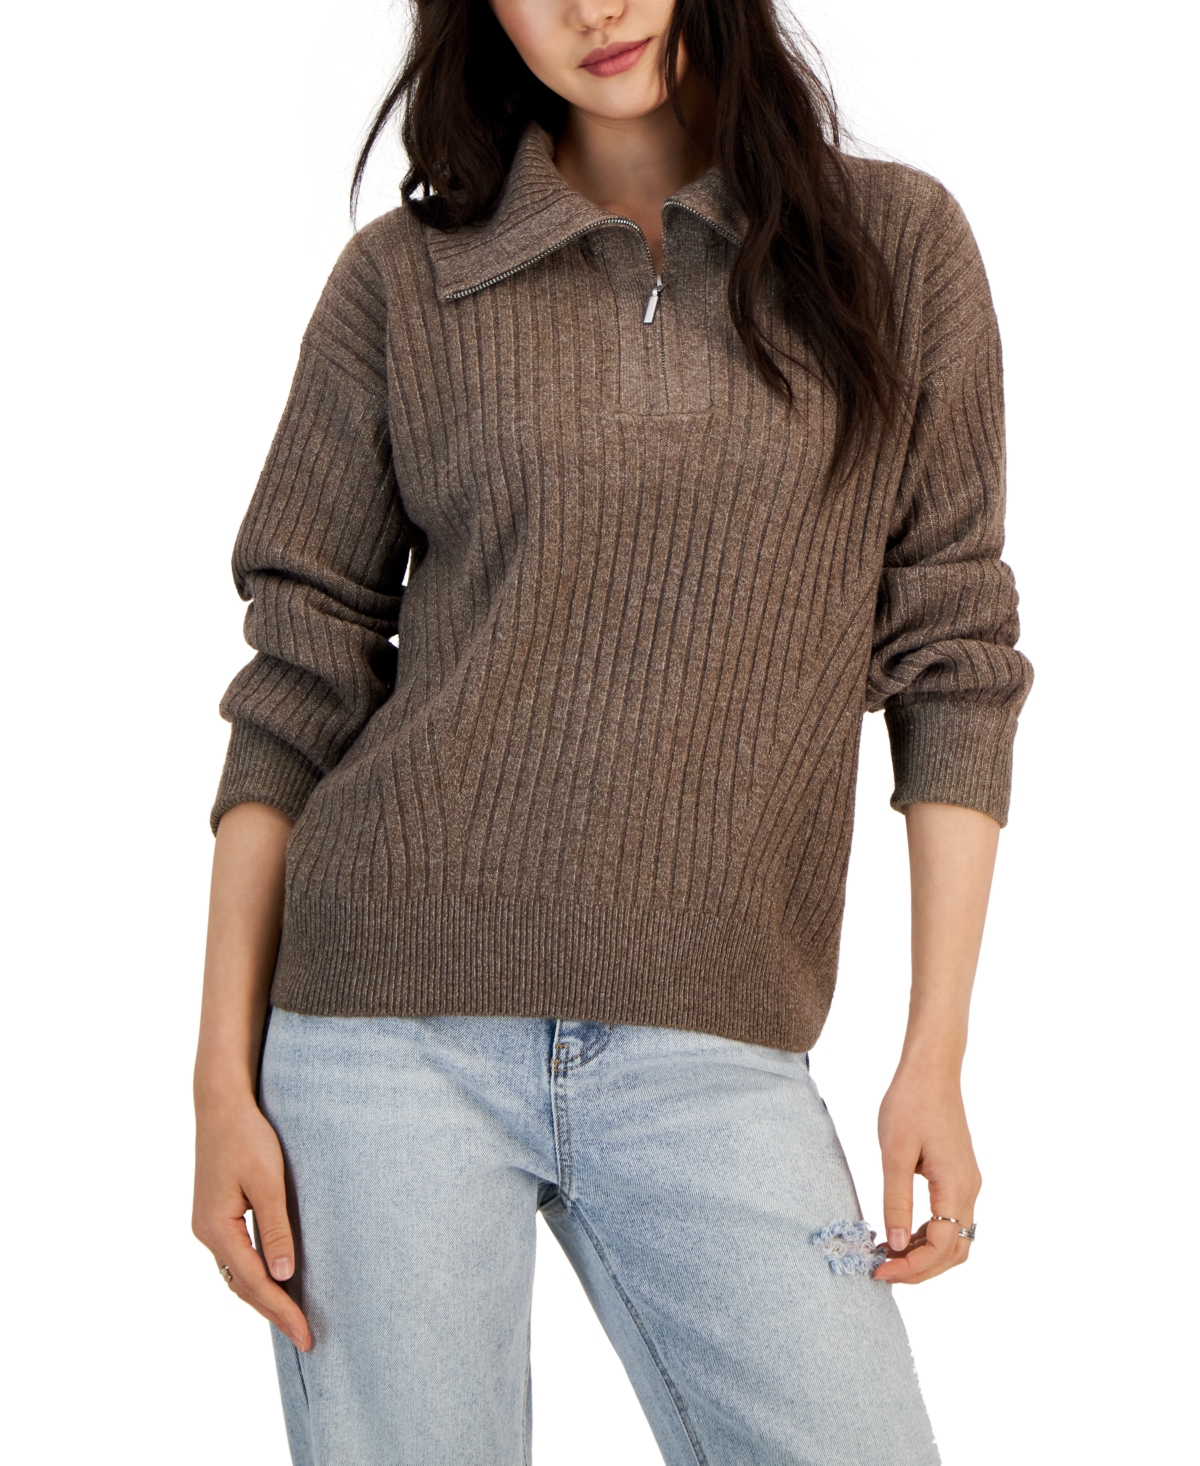 Hooked Up By Iot Juniors' Rib-knit Half-zip Sweater In Brown Lentil